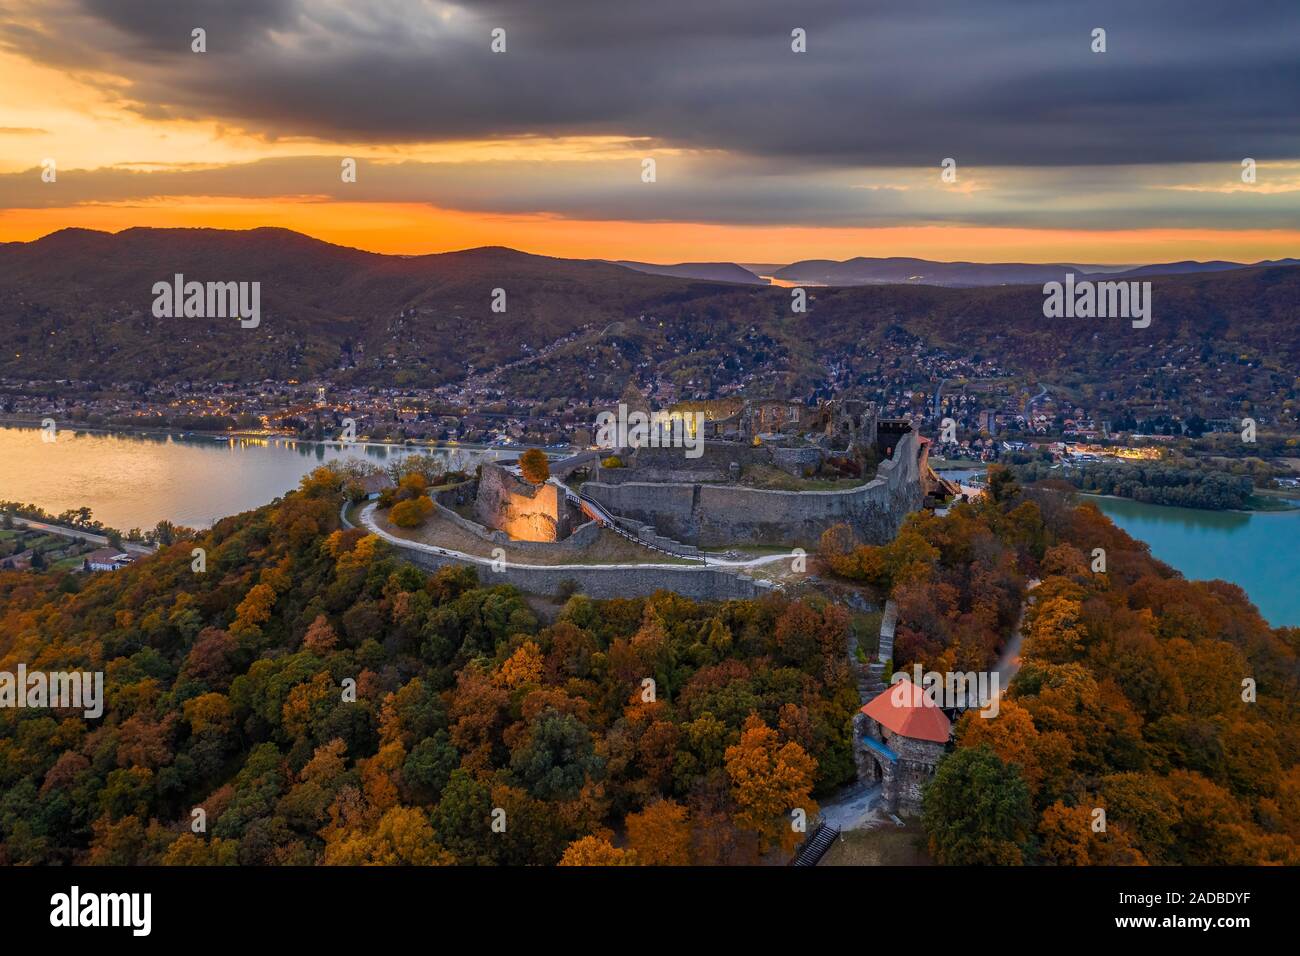 Visegrad, Hungary - Autumn at Visegrad. Aerial drone view of the beautiful high castle of Visegrad with colorful sunset and Dunakanyar at background Stock Photo